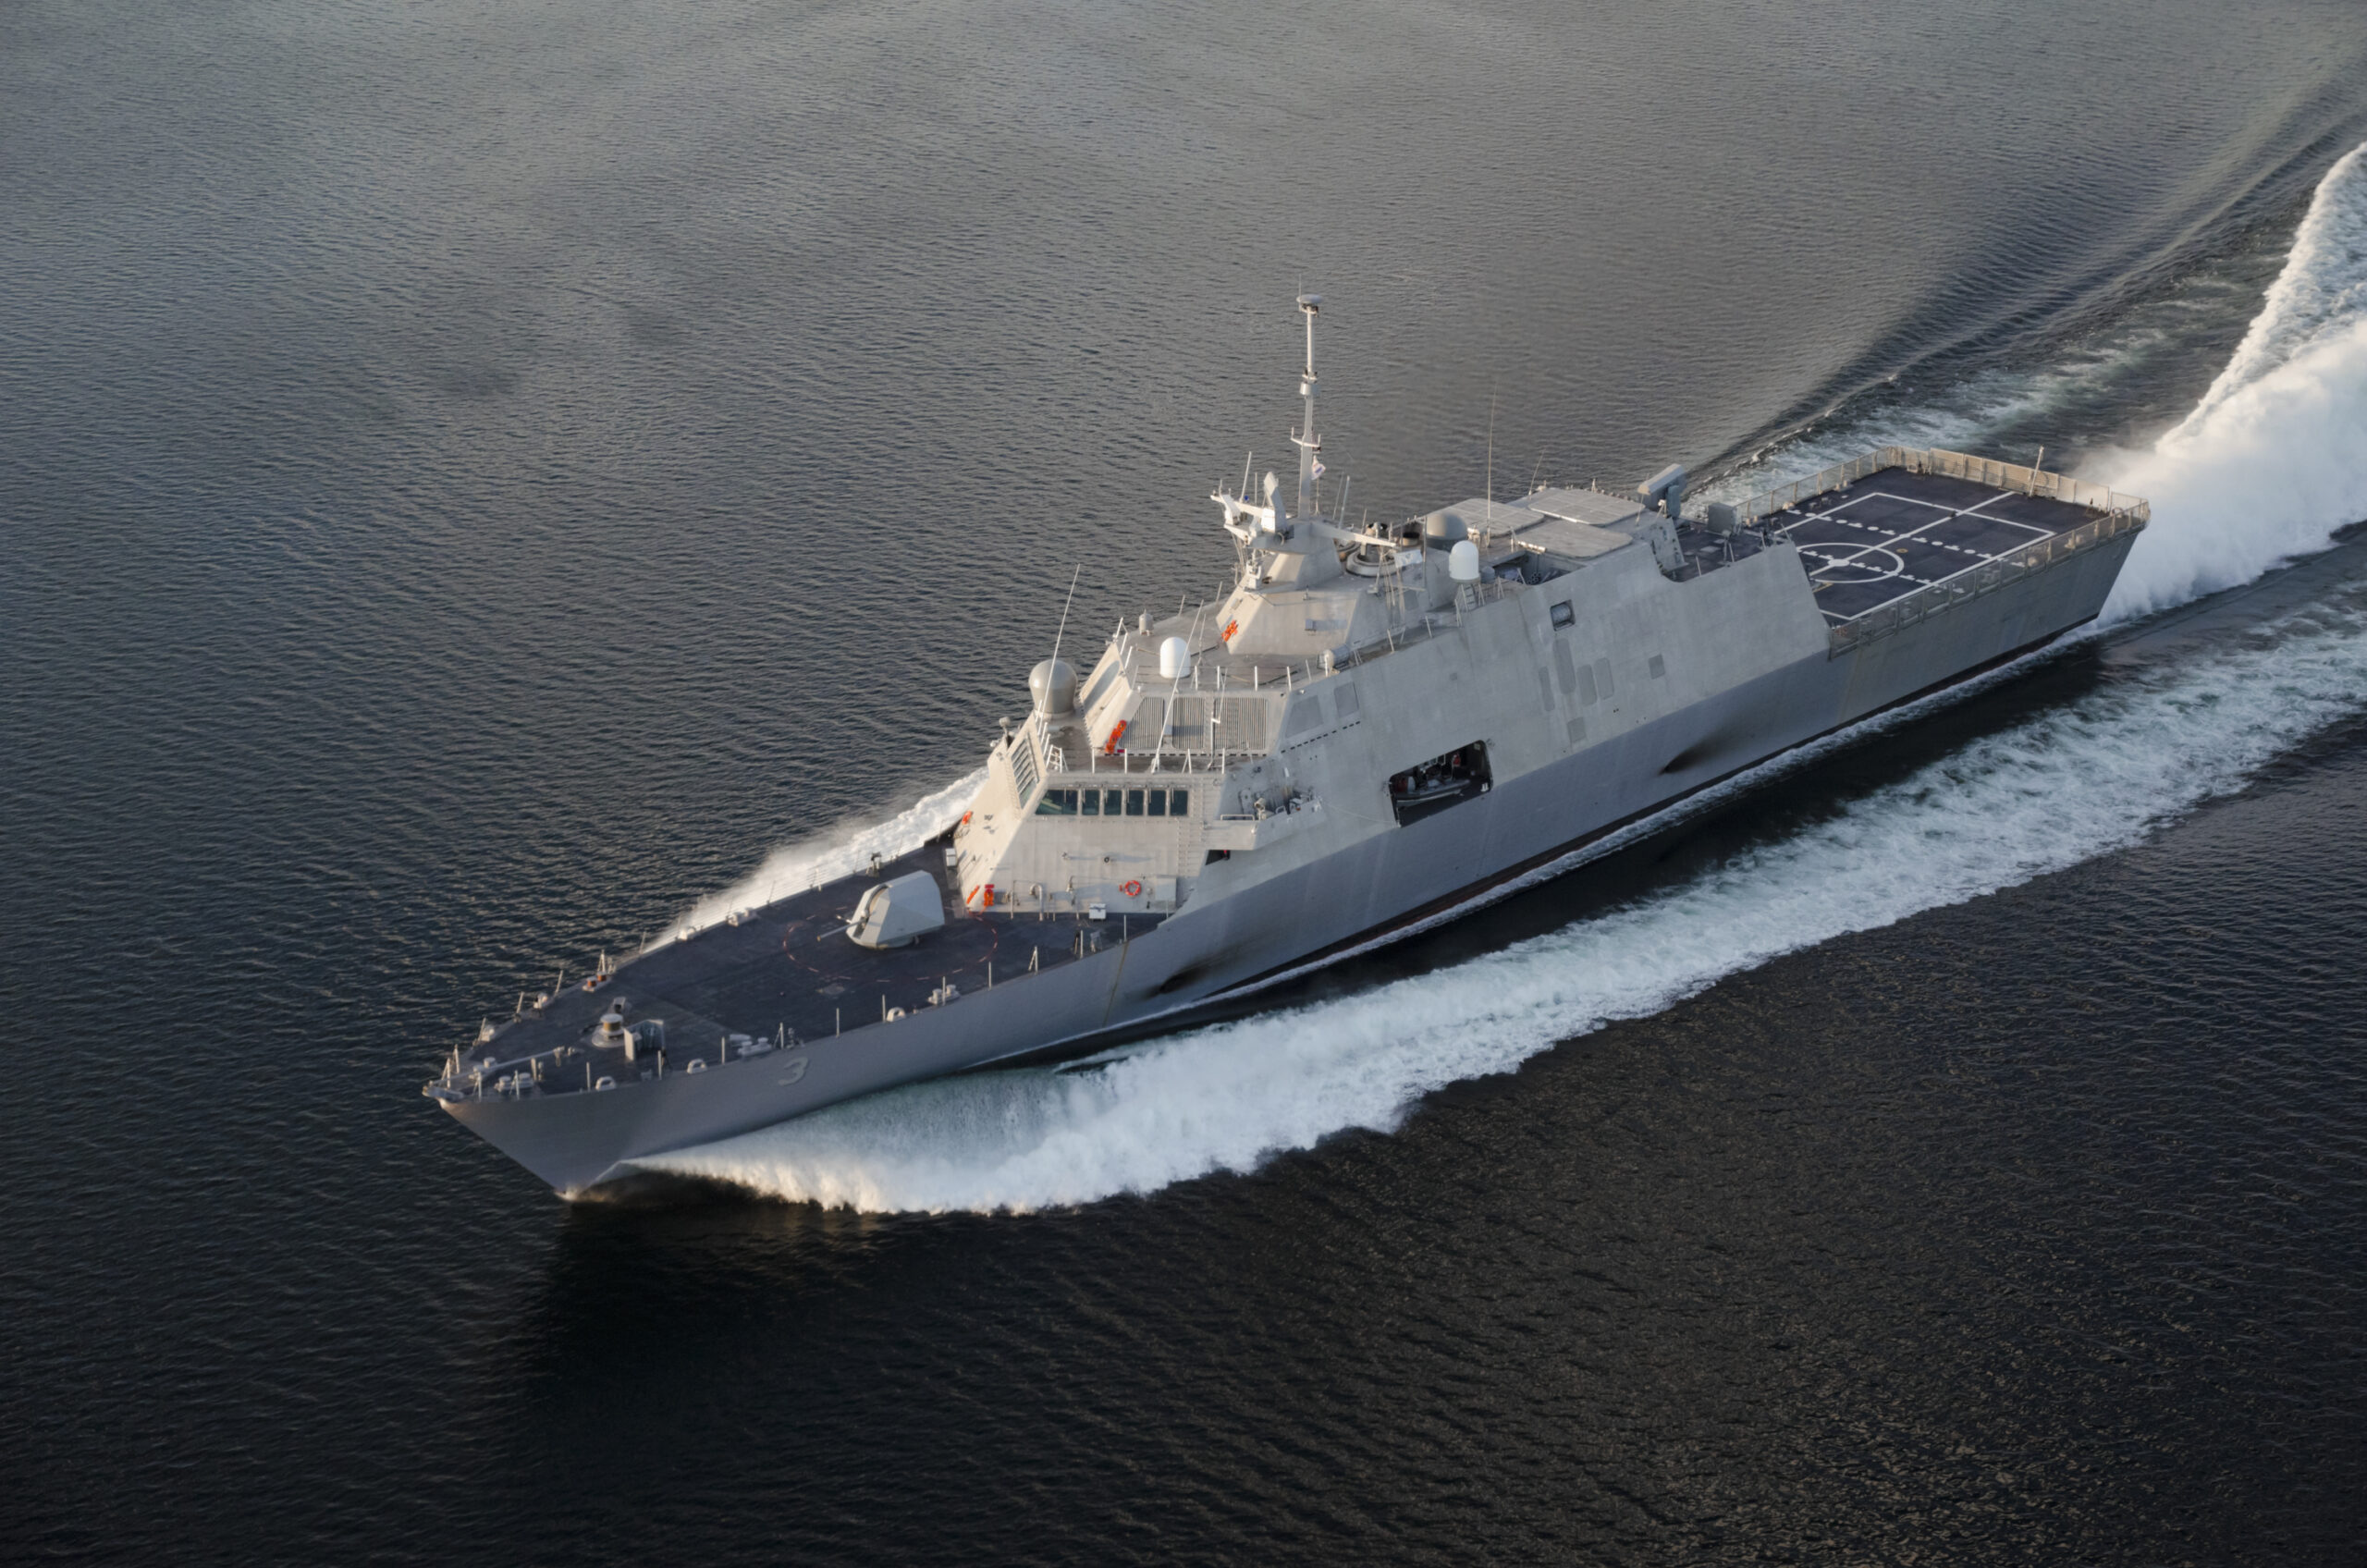 Shipbuilding Firm Continues To Fill Orders For U.S. Navy